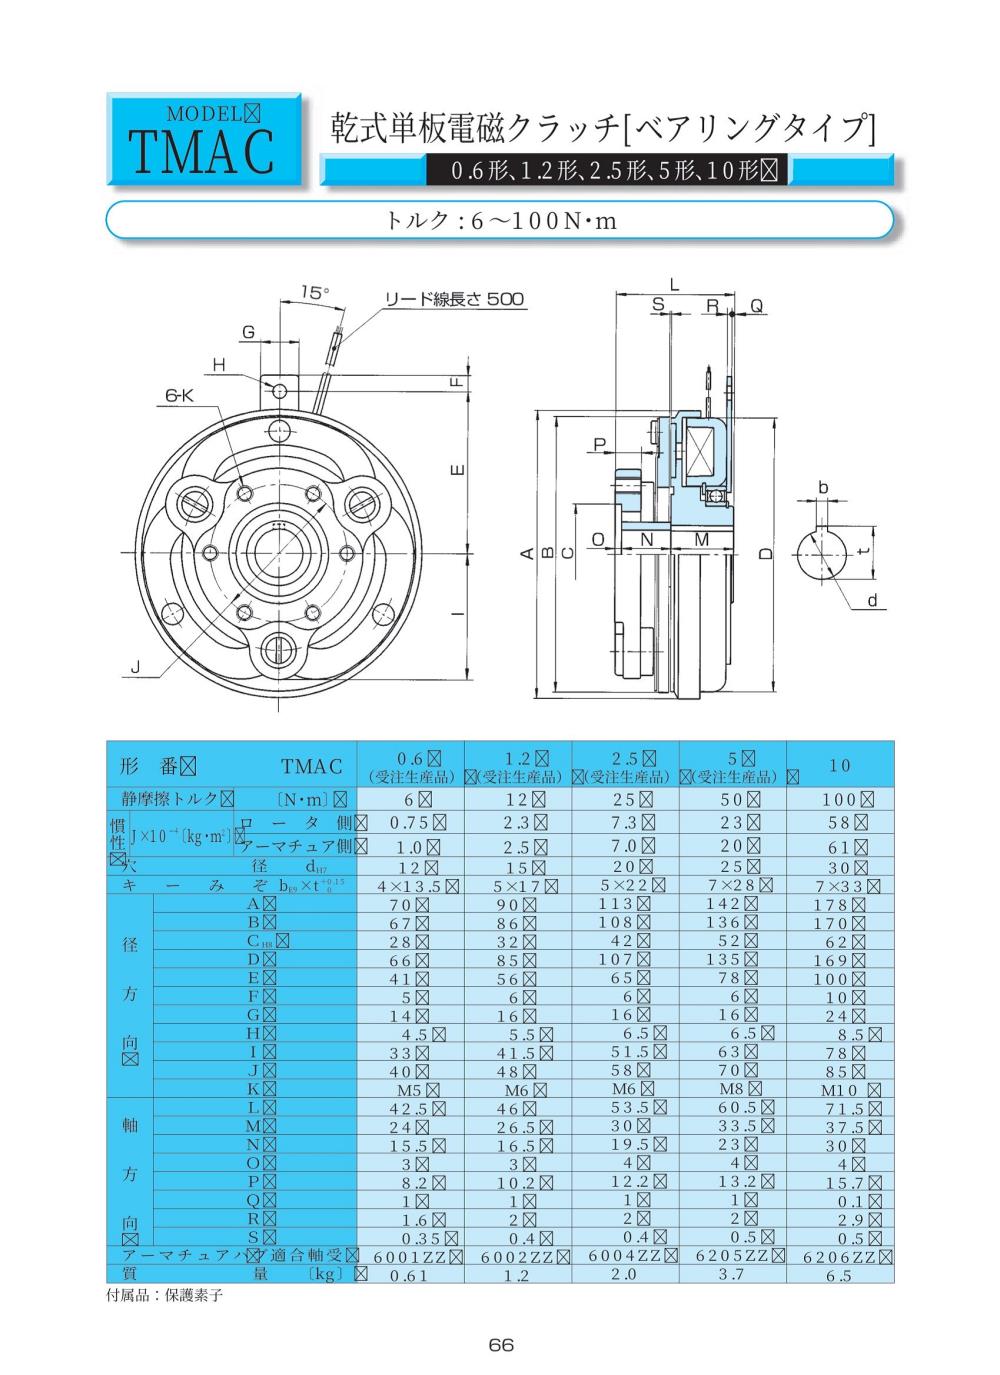 OGURA Electromagnetic Clutch TMAC Series,TMAC 0.6, TMAC 1.2, TMAC 2.5, TMAC 5, TMAC 10, OGURA, Electromagnetic Clutch,OGURA,Machinery and Process Equipment/Brakes and Clutches/Clutch